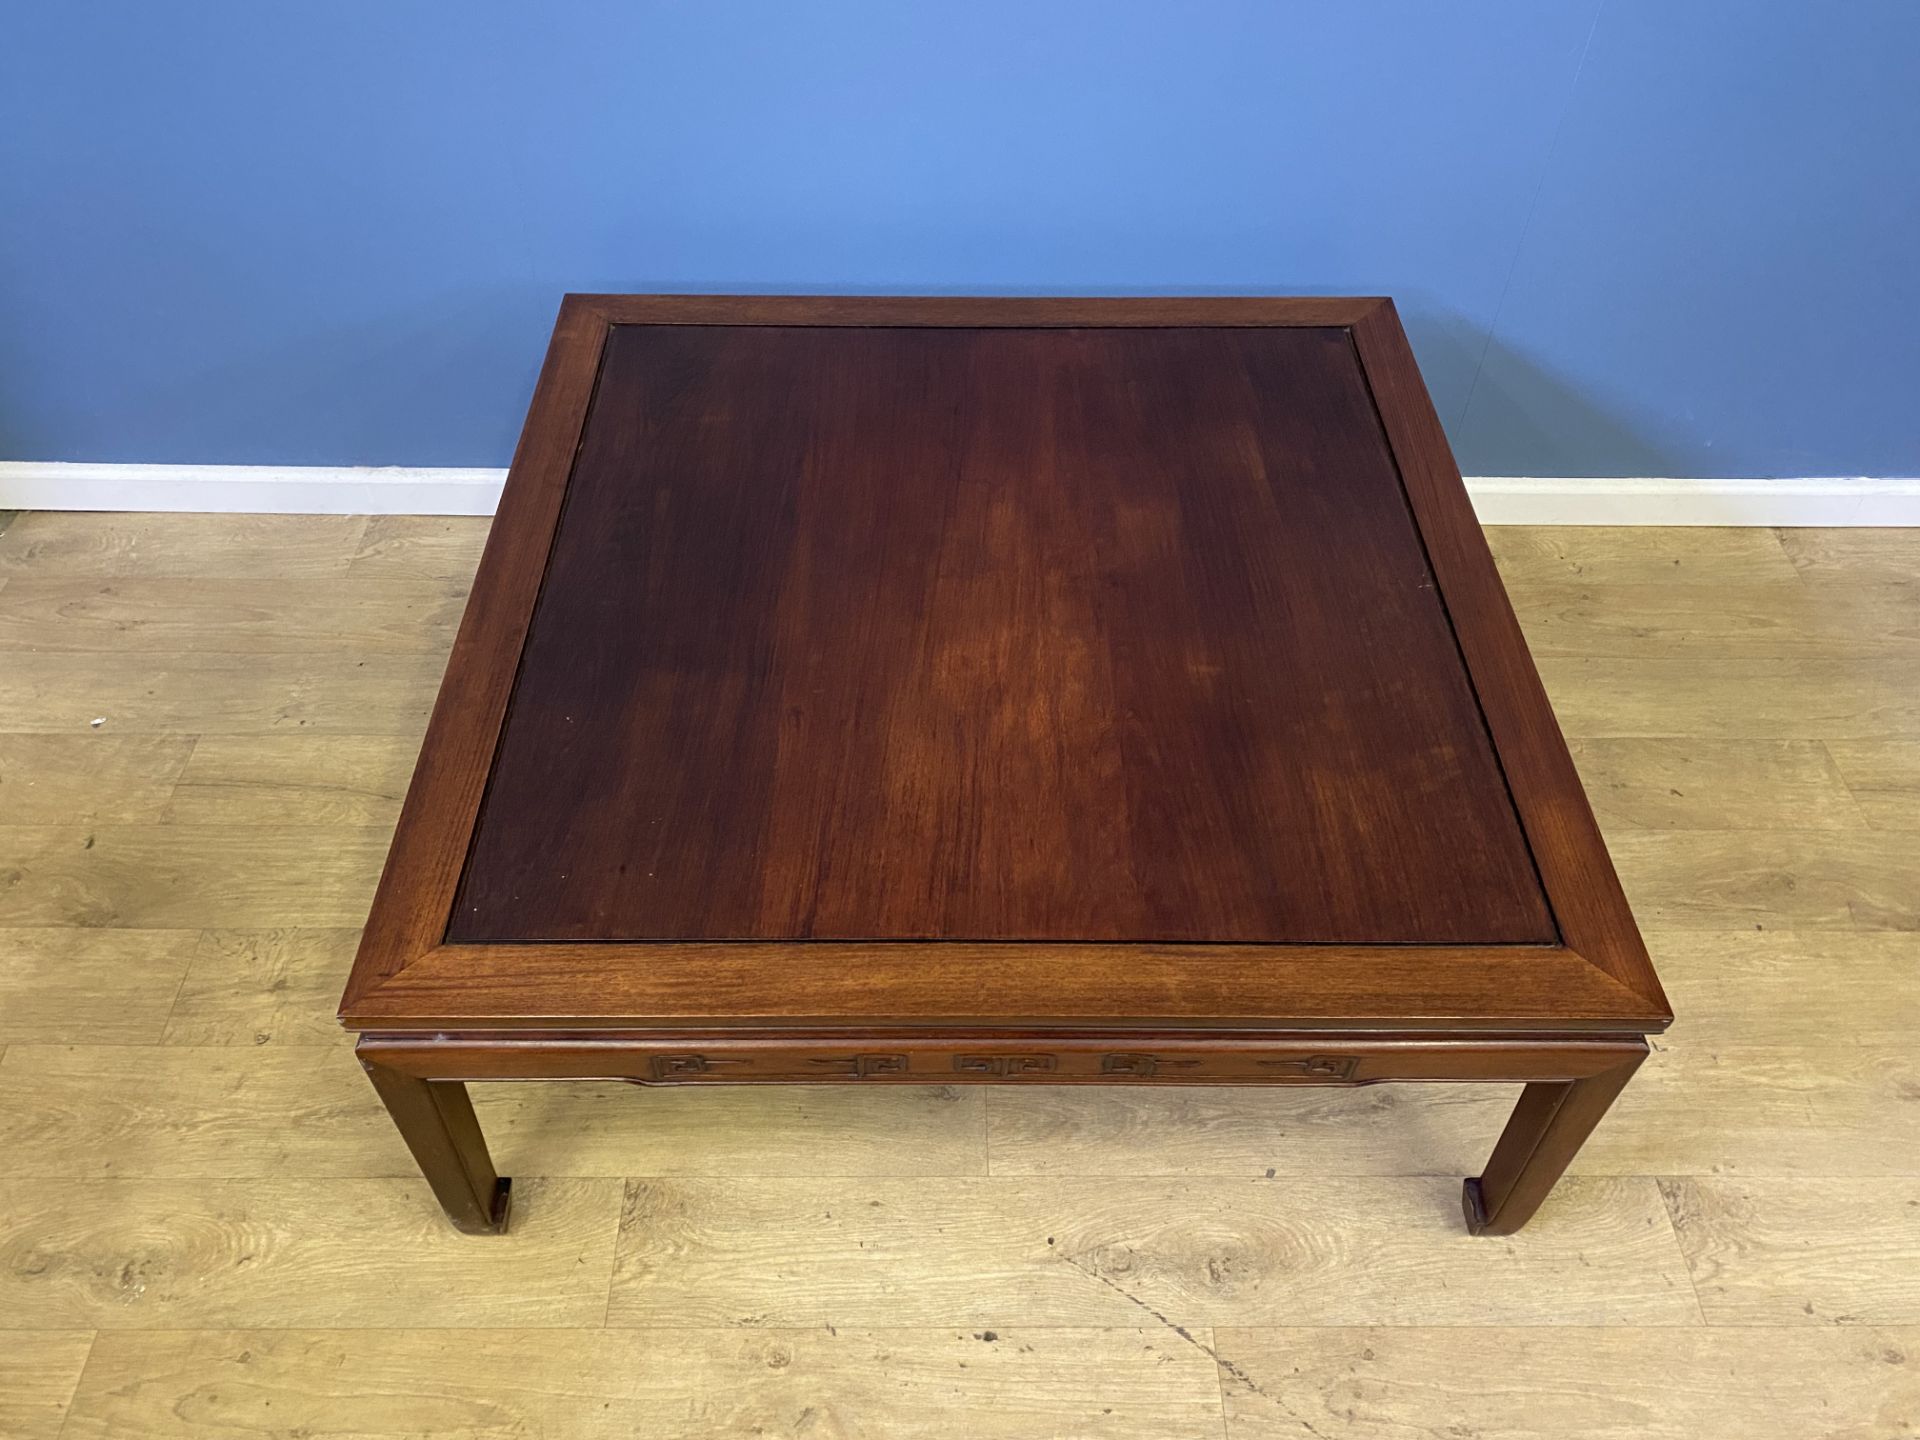 Contemporary Oriental style coffee table - Image 2 of 4